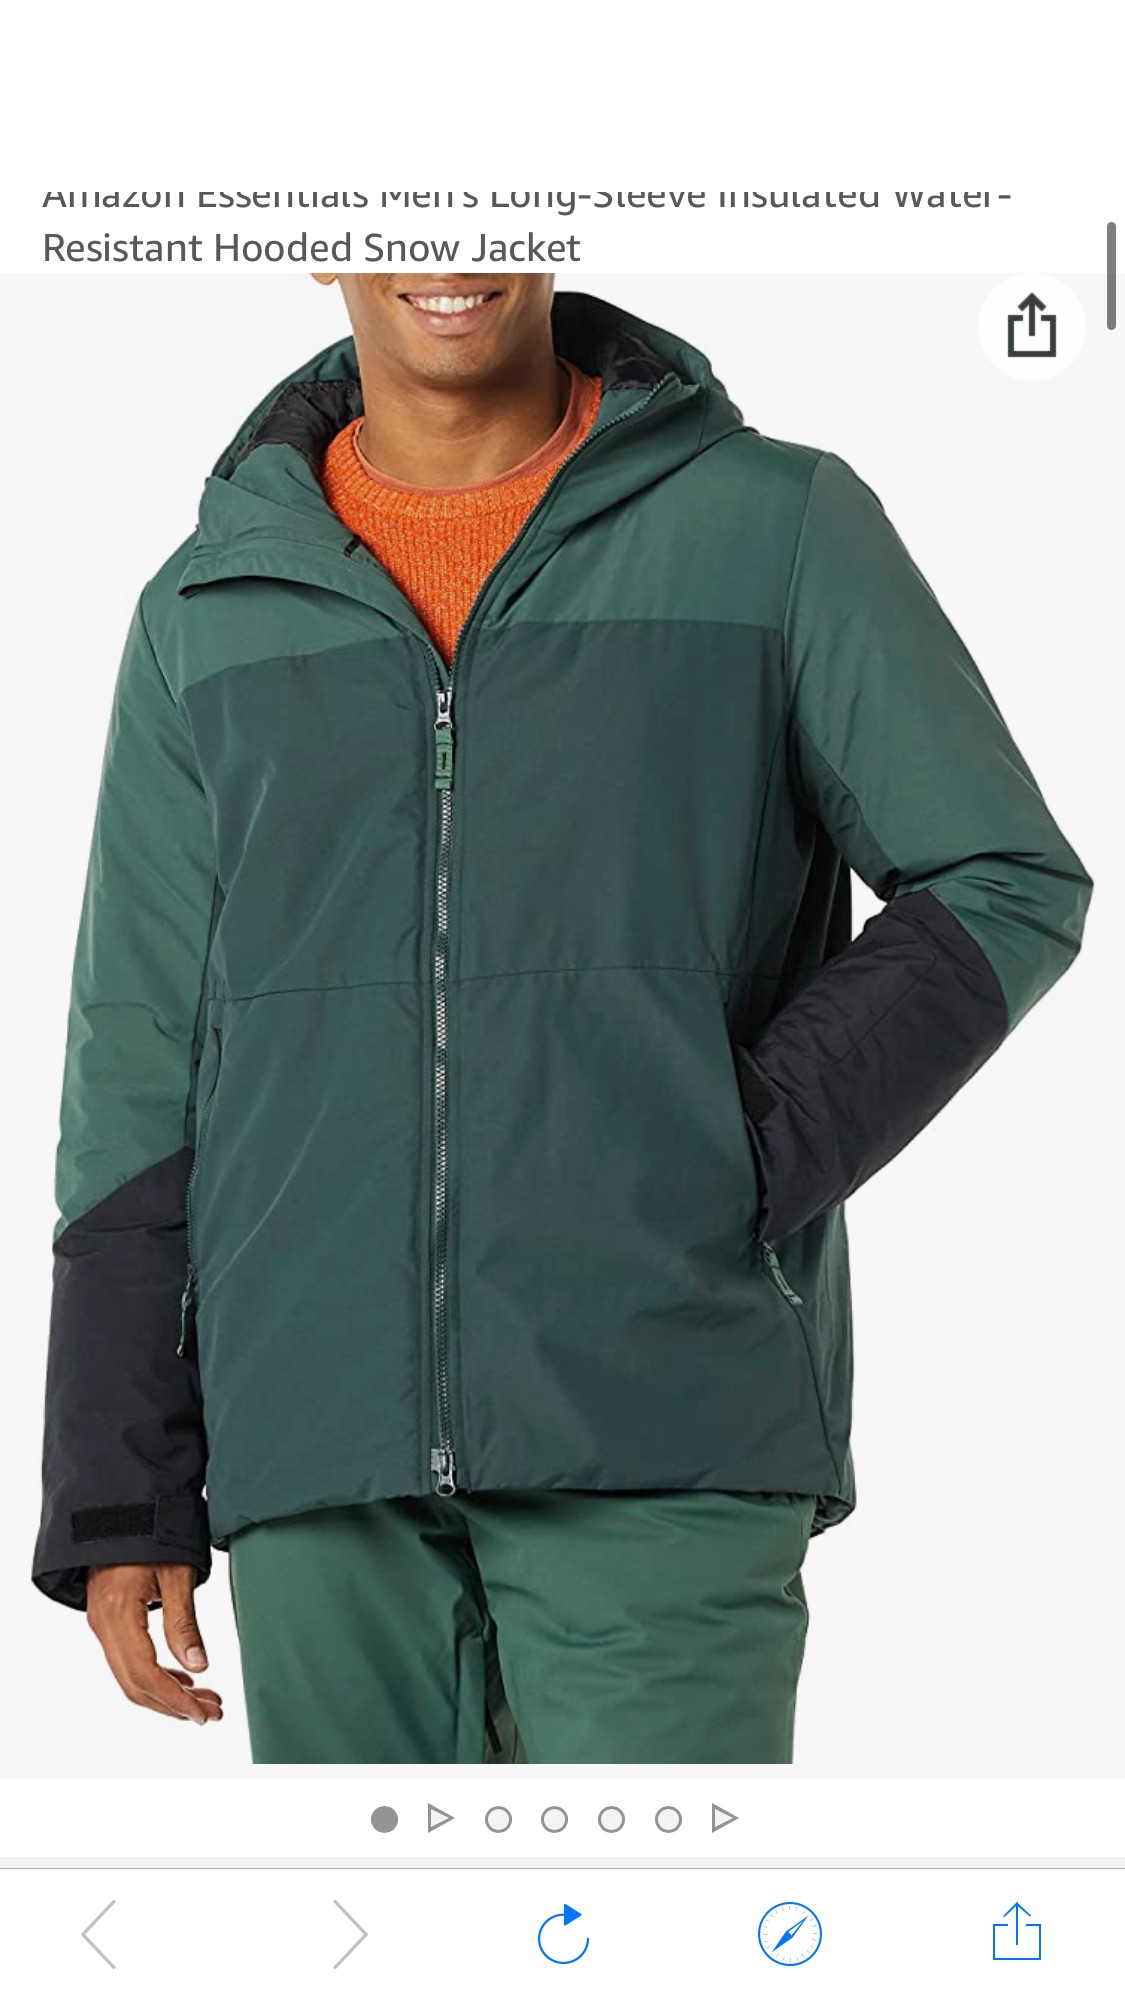 Amazon Essentials Men's Long-Sleeve Insulated Water-Resistant Hooded Snow Jacket, Green Color Block, Medium : Clothing, 亚马逊自营男士外套